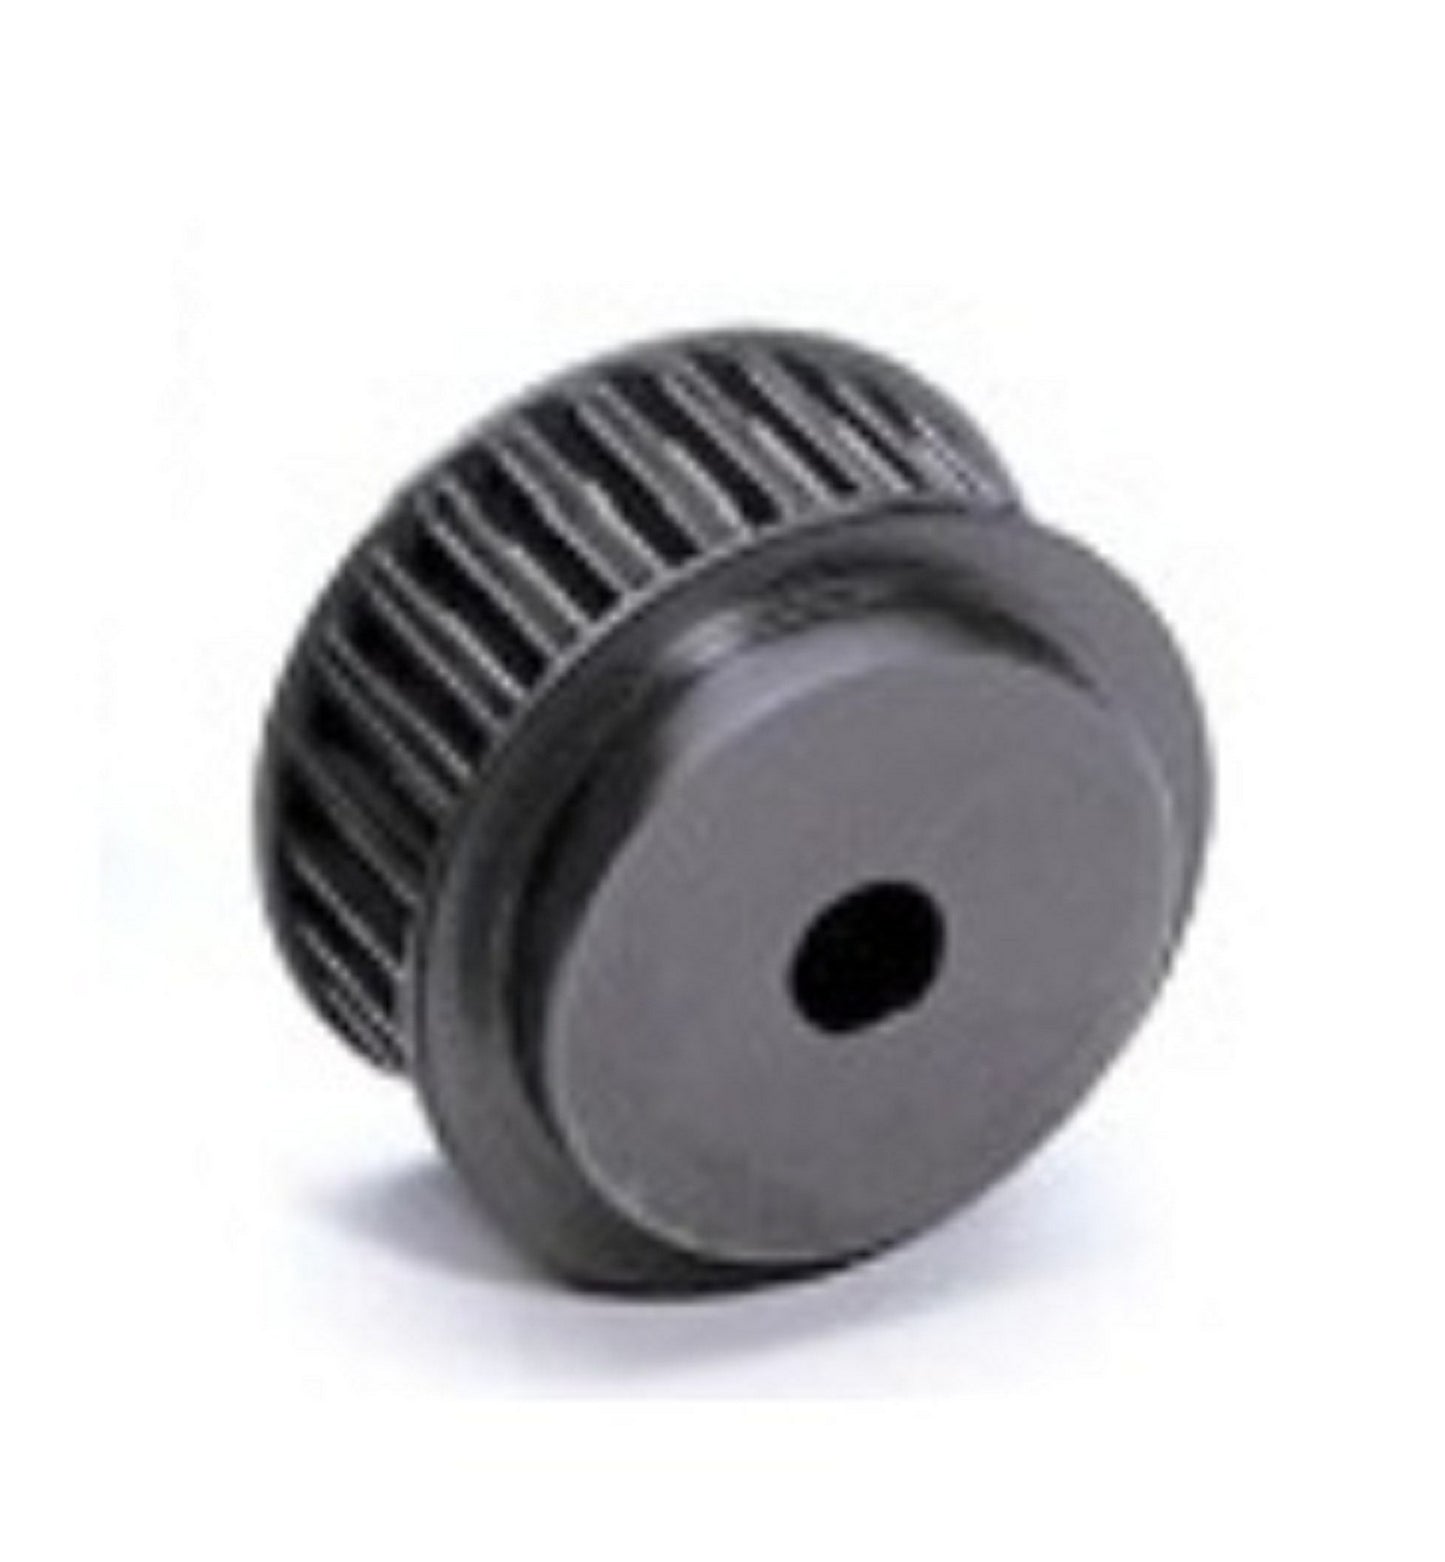 26-8M-30 Steel Timing Pulley 26 tooth MPB